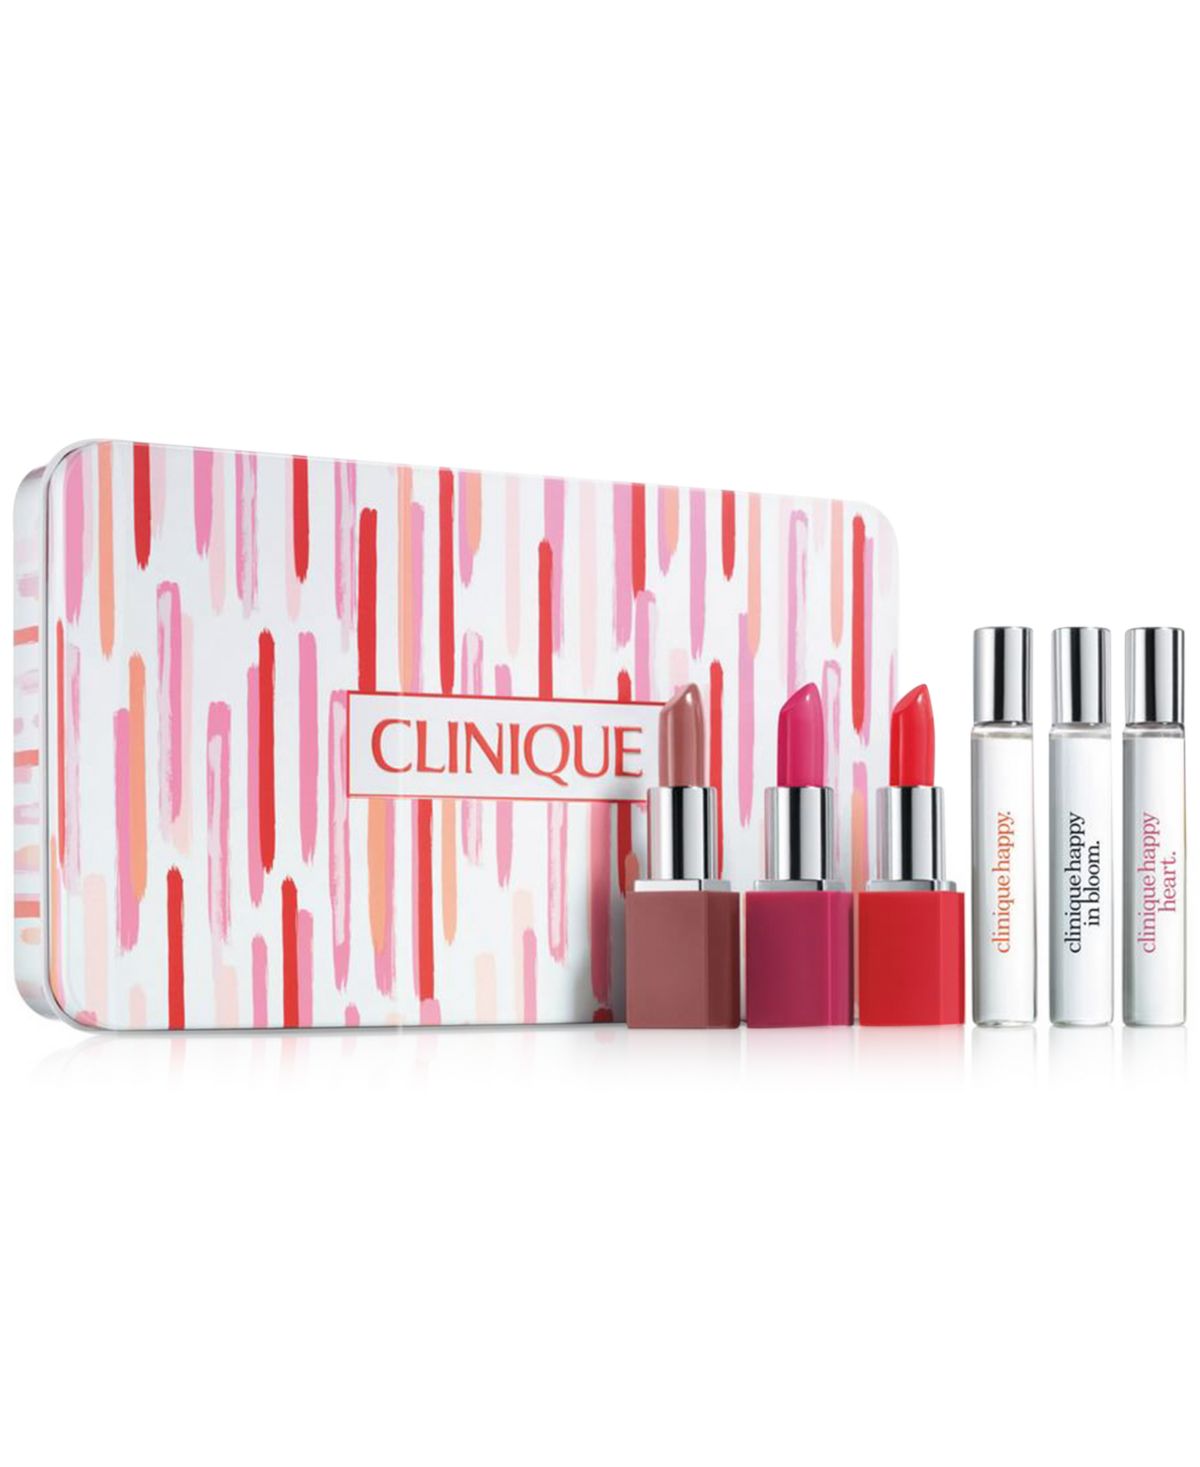 Macy’s Clinique Gift Sets ONLY 19.75 & FREE Shipping